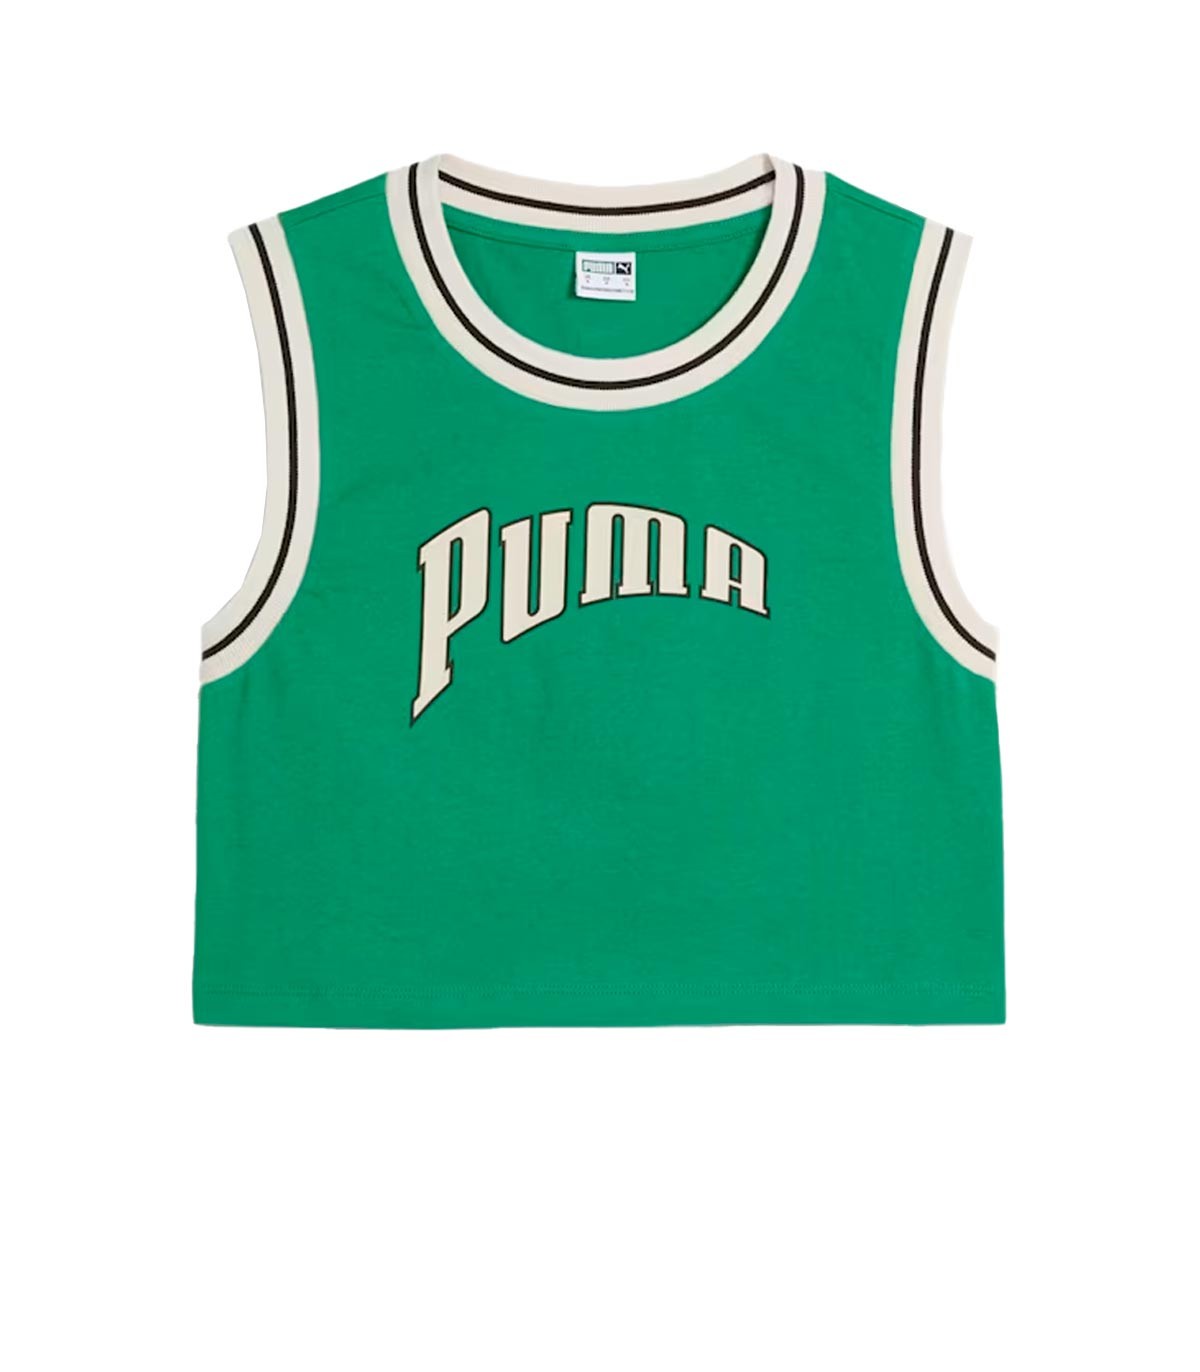 Puma - Top Sin Mangas Team For The Fanbase - Verde